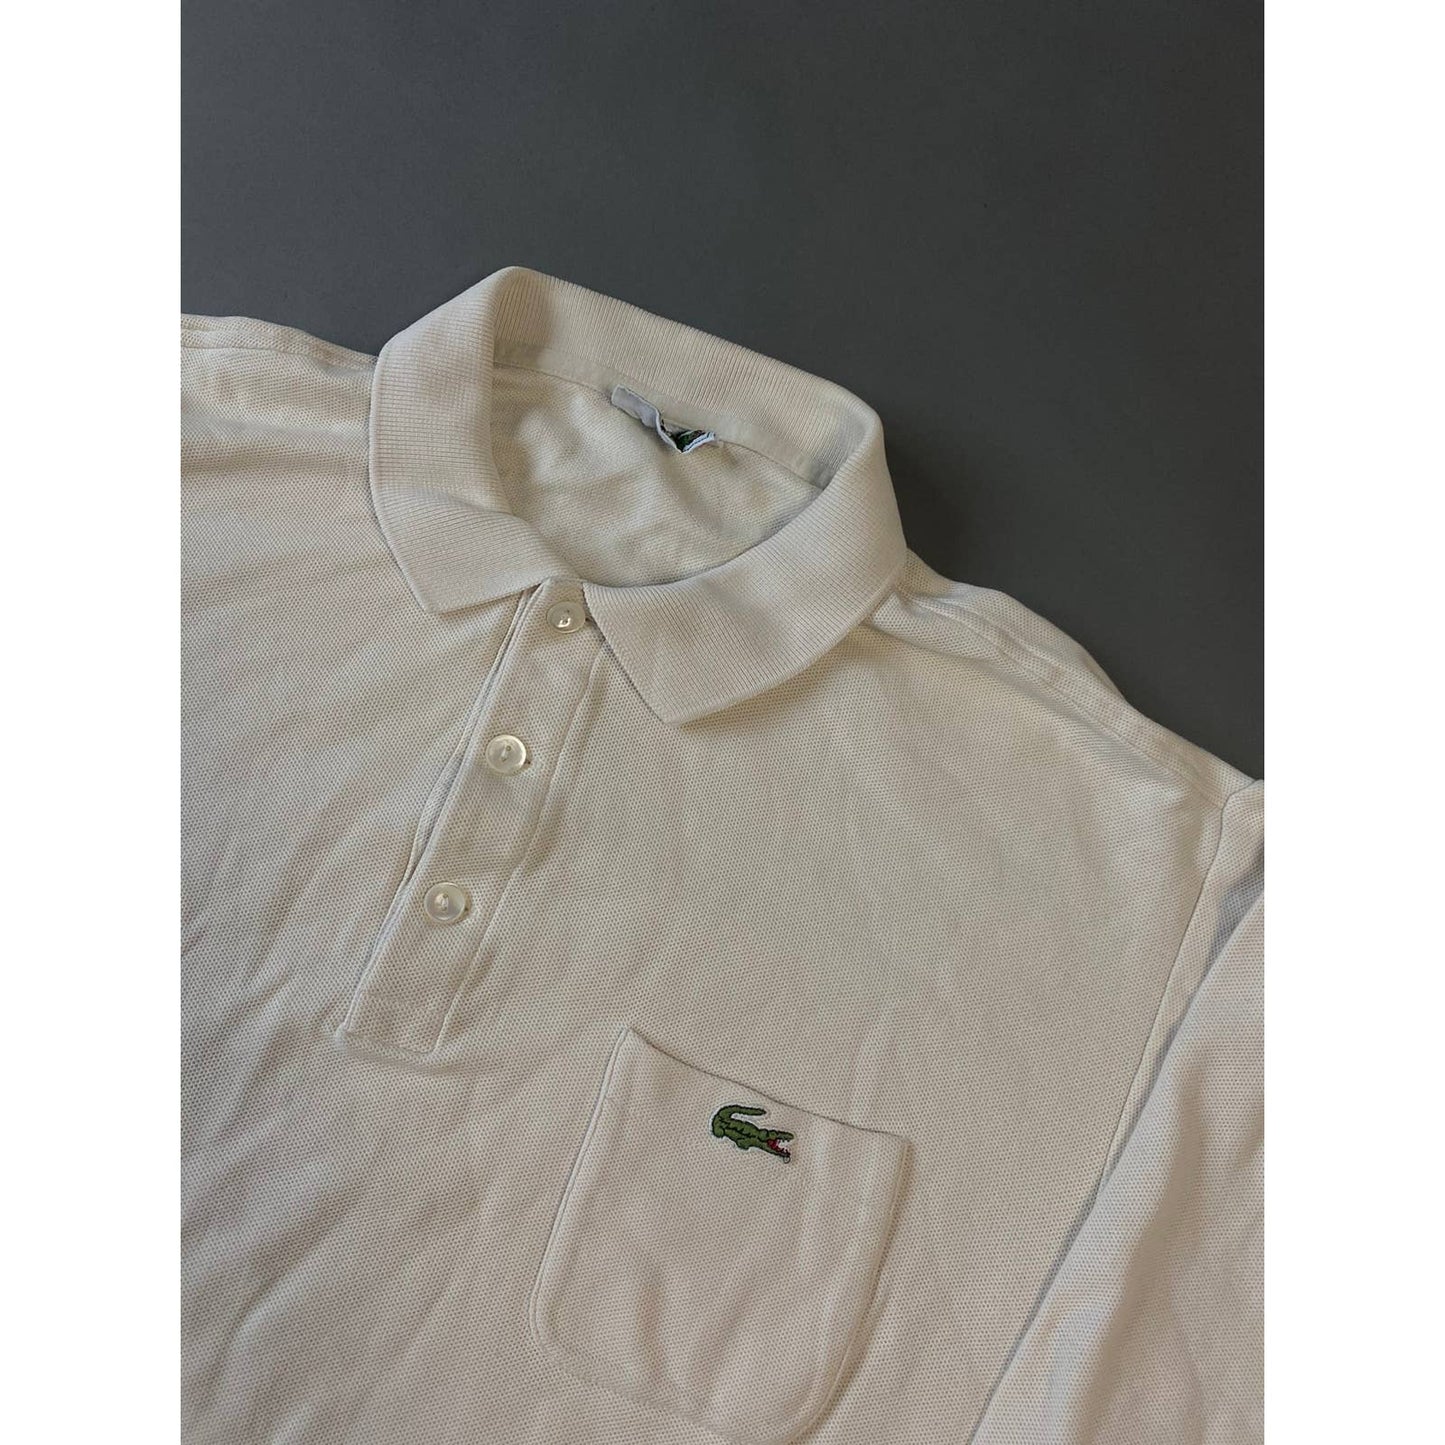 Lacoste vintage cream long sleeve polo t-shirt rugby